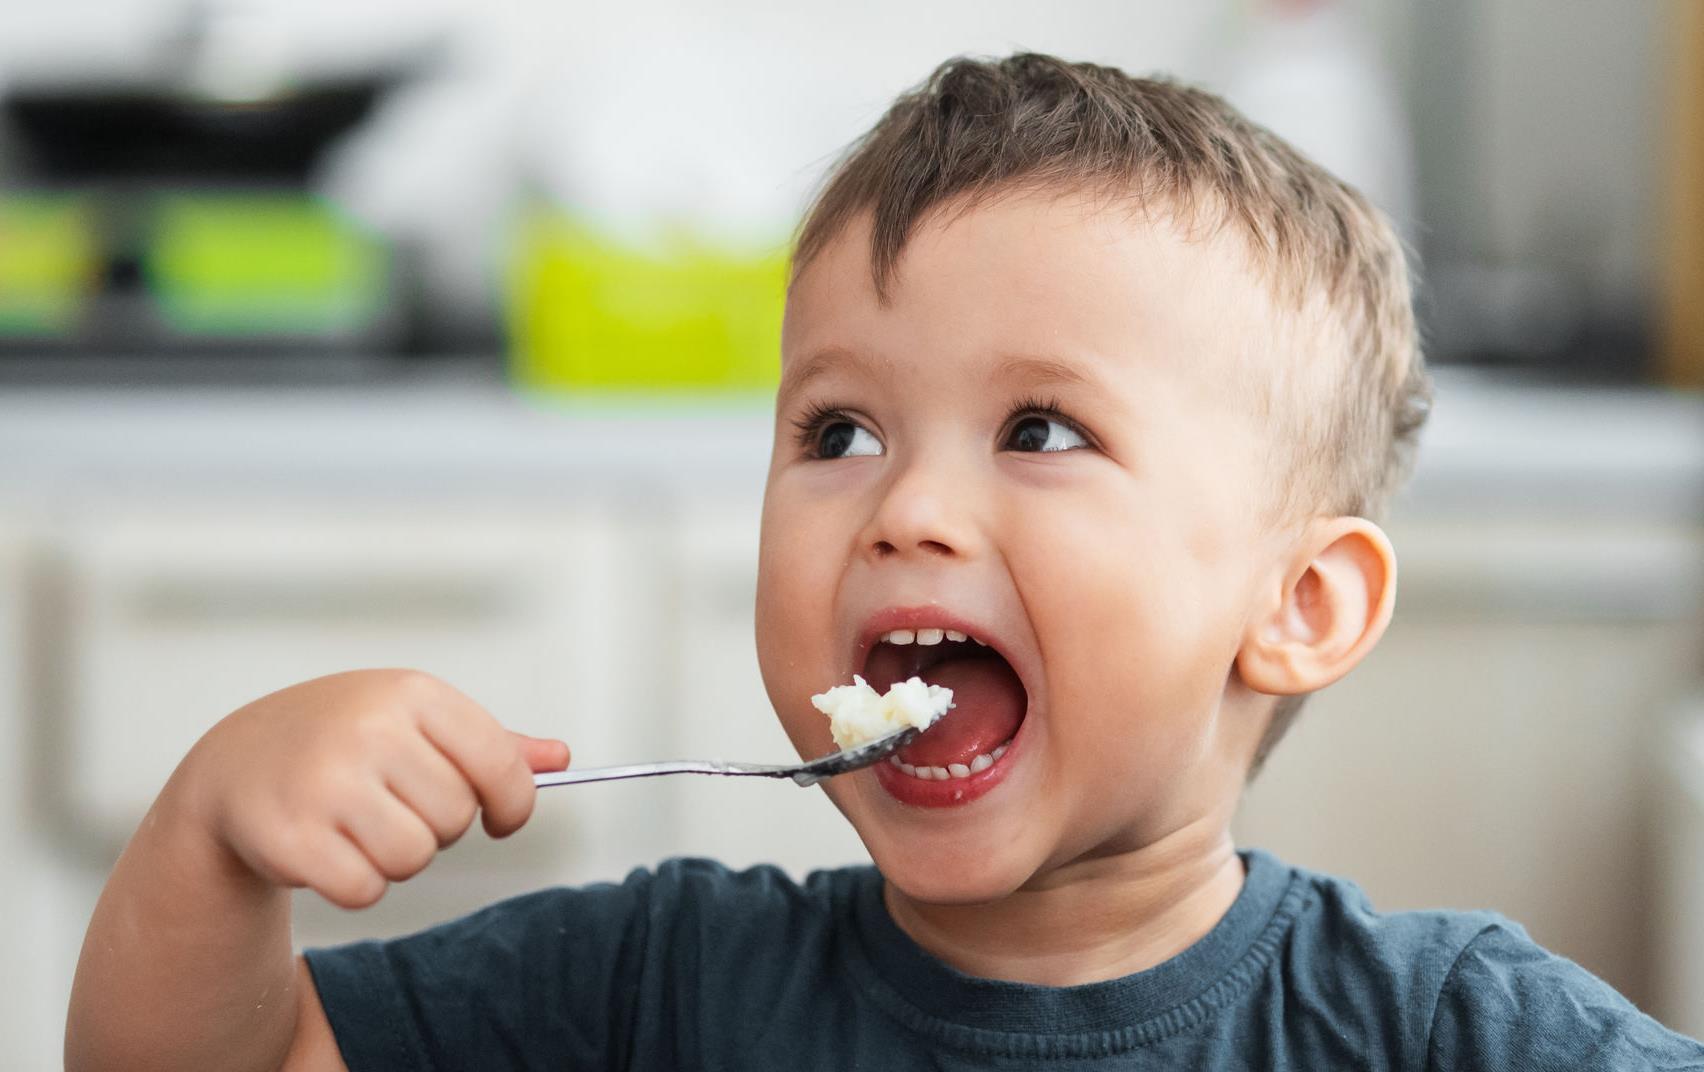  Male toddler eating rice with spoon